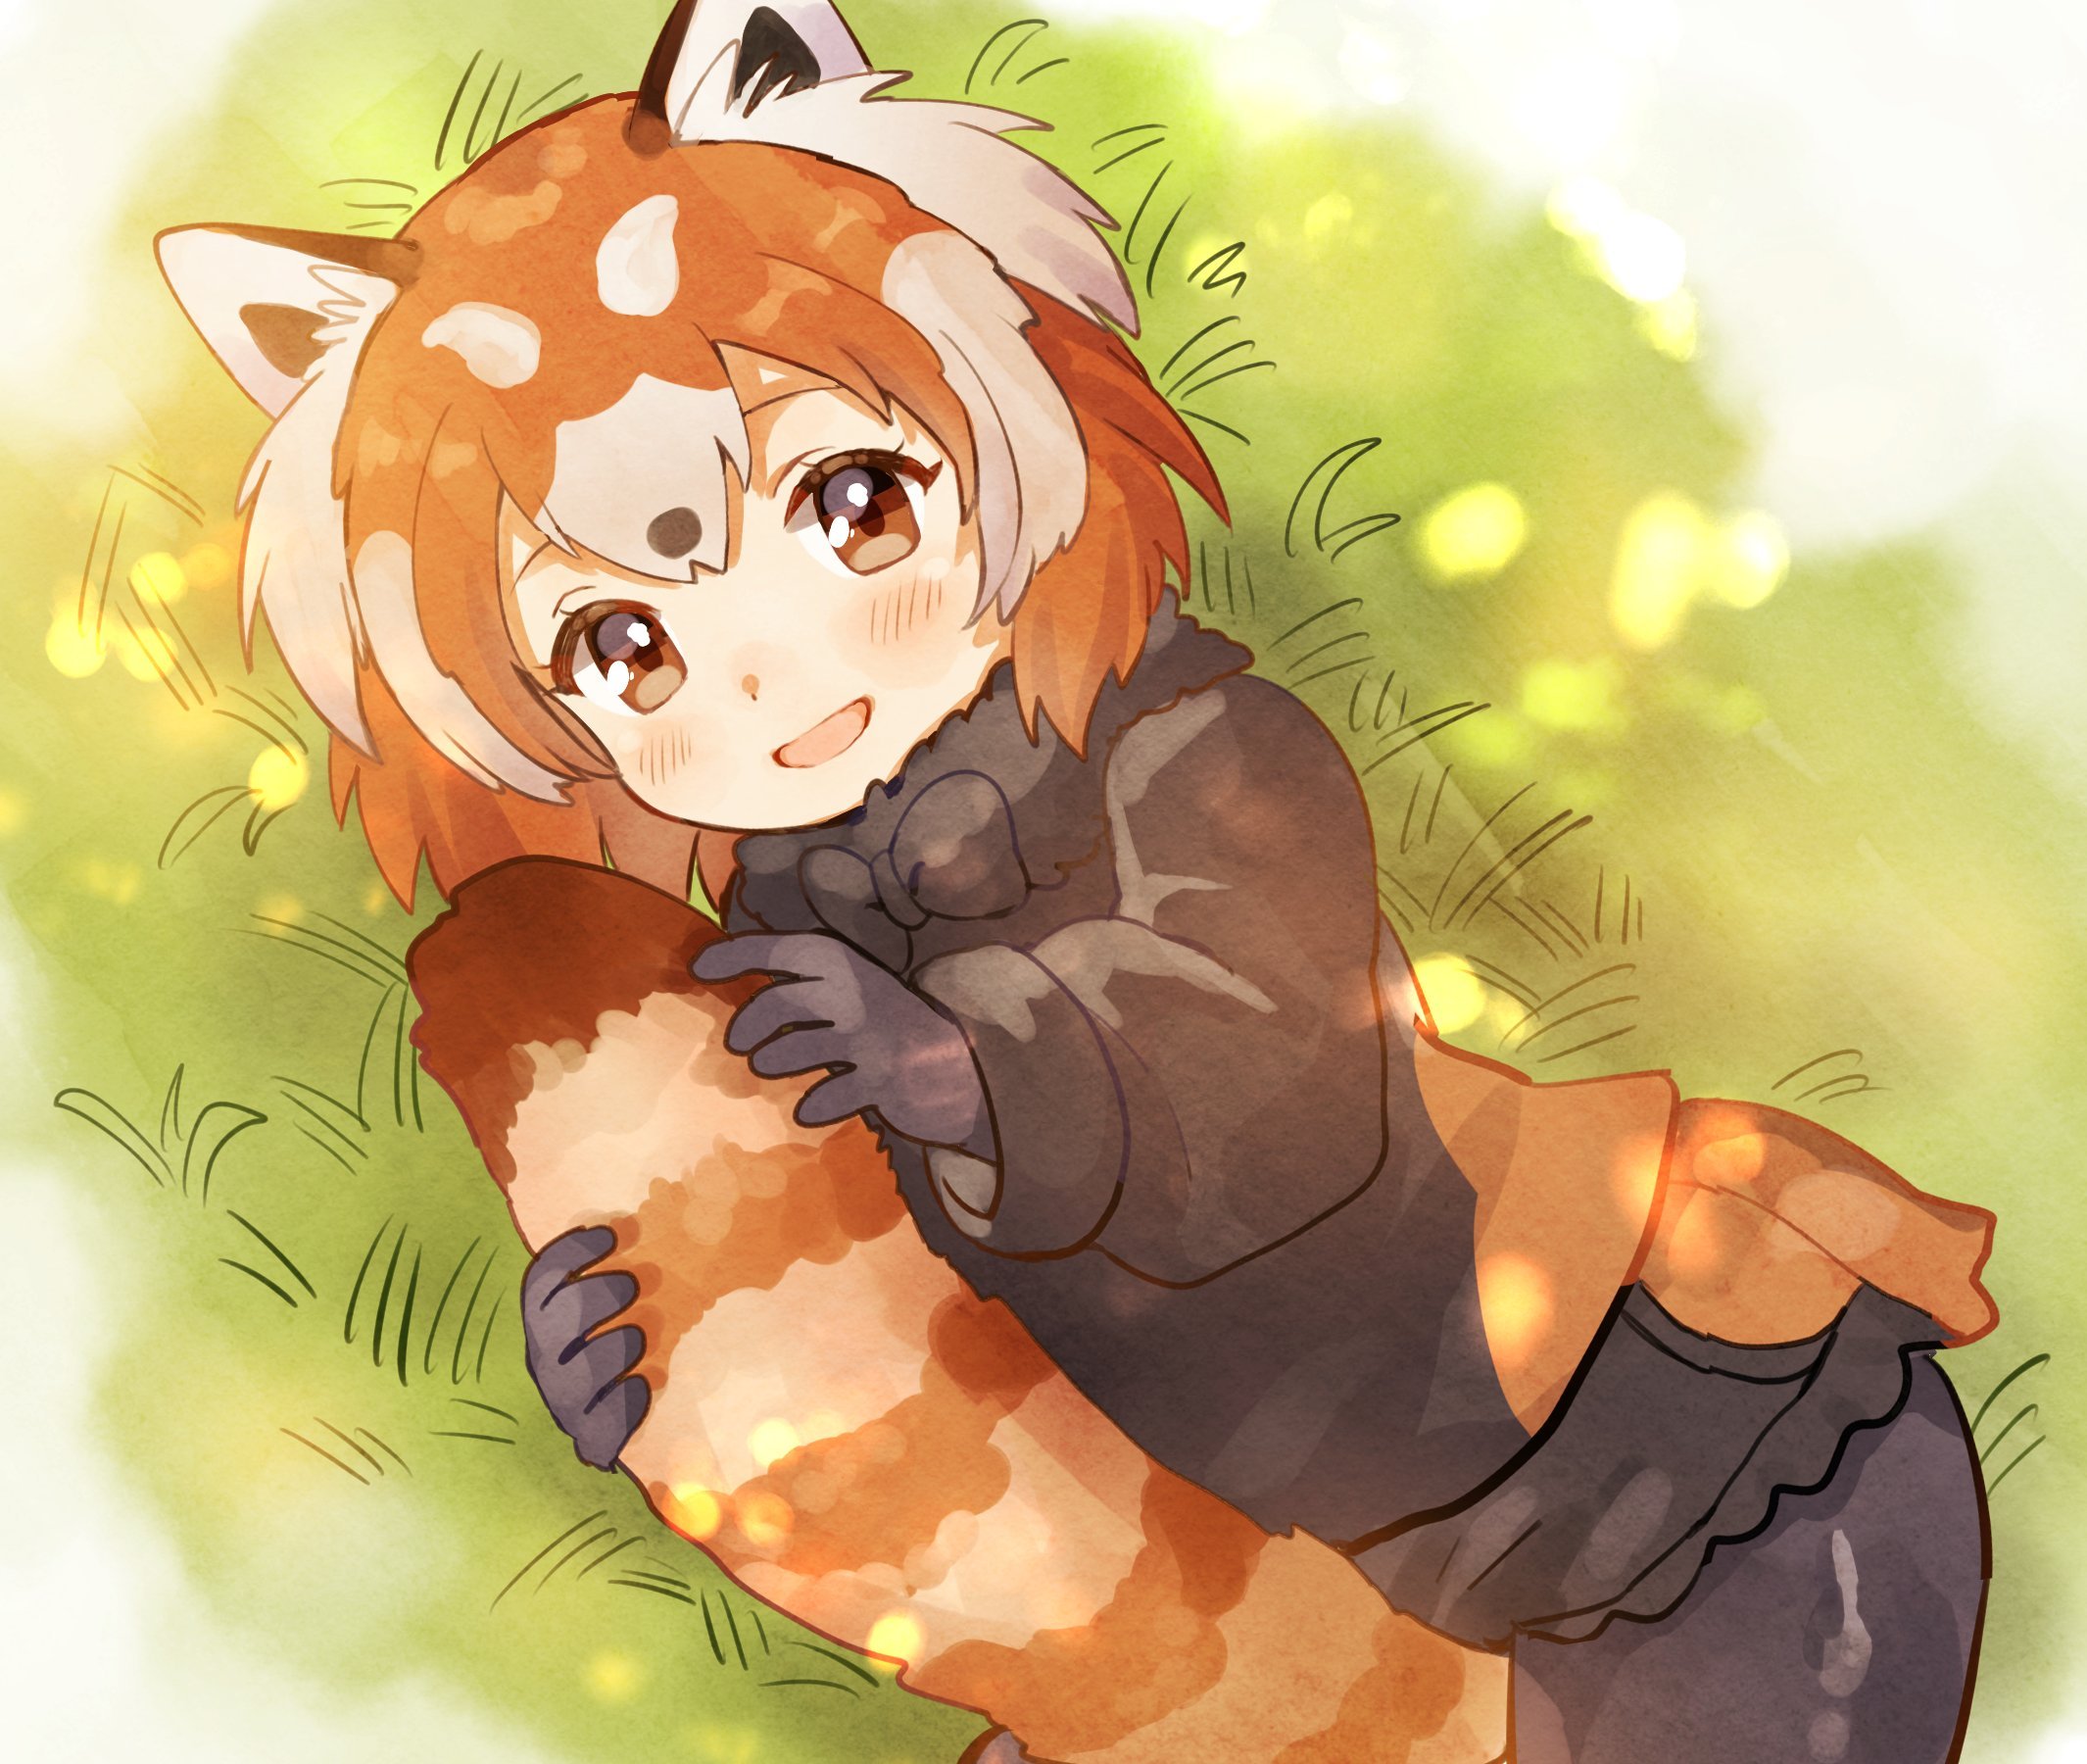 Red Panda By Toru Sanogawa Cute Idea For A Tattoo Kawaii Anime Red Panda  PNG Image With Transparent Background  TOPpng